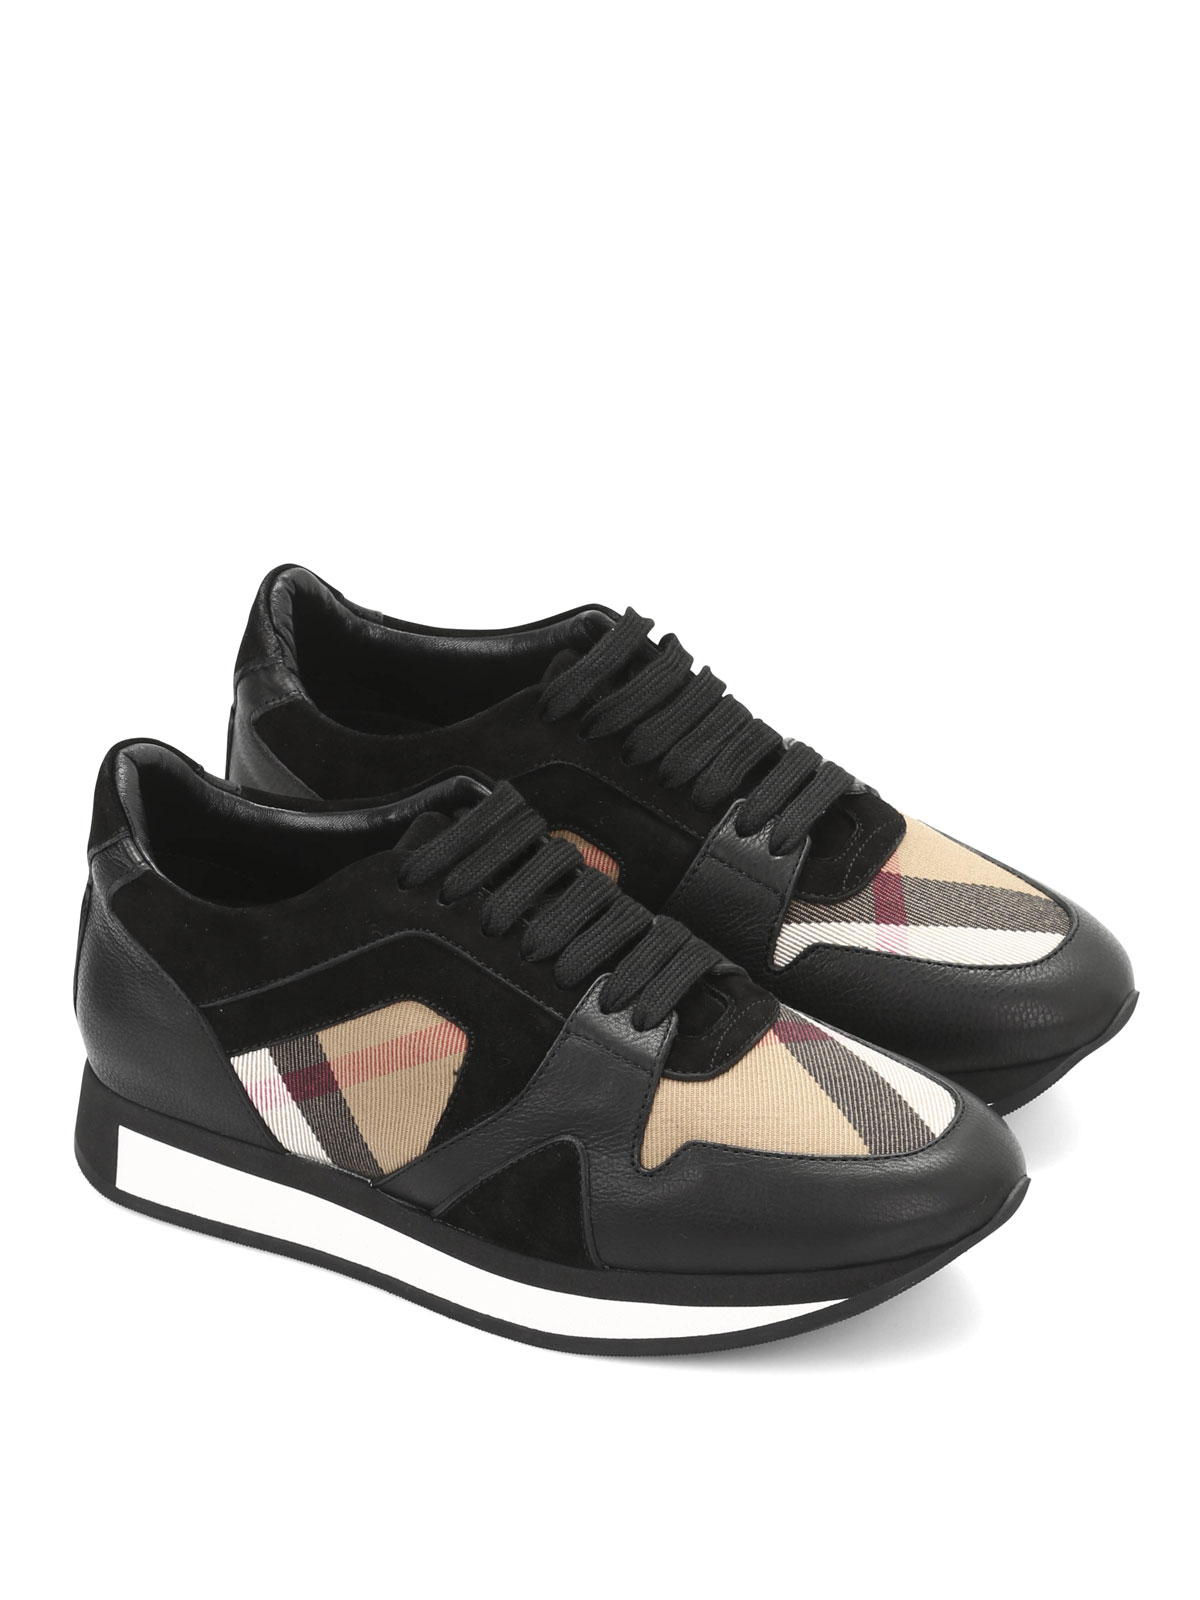 Burberry - The Field sneakers 